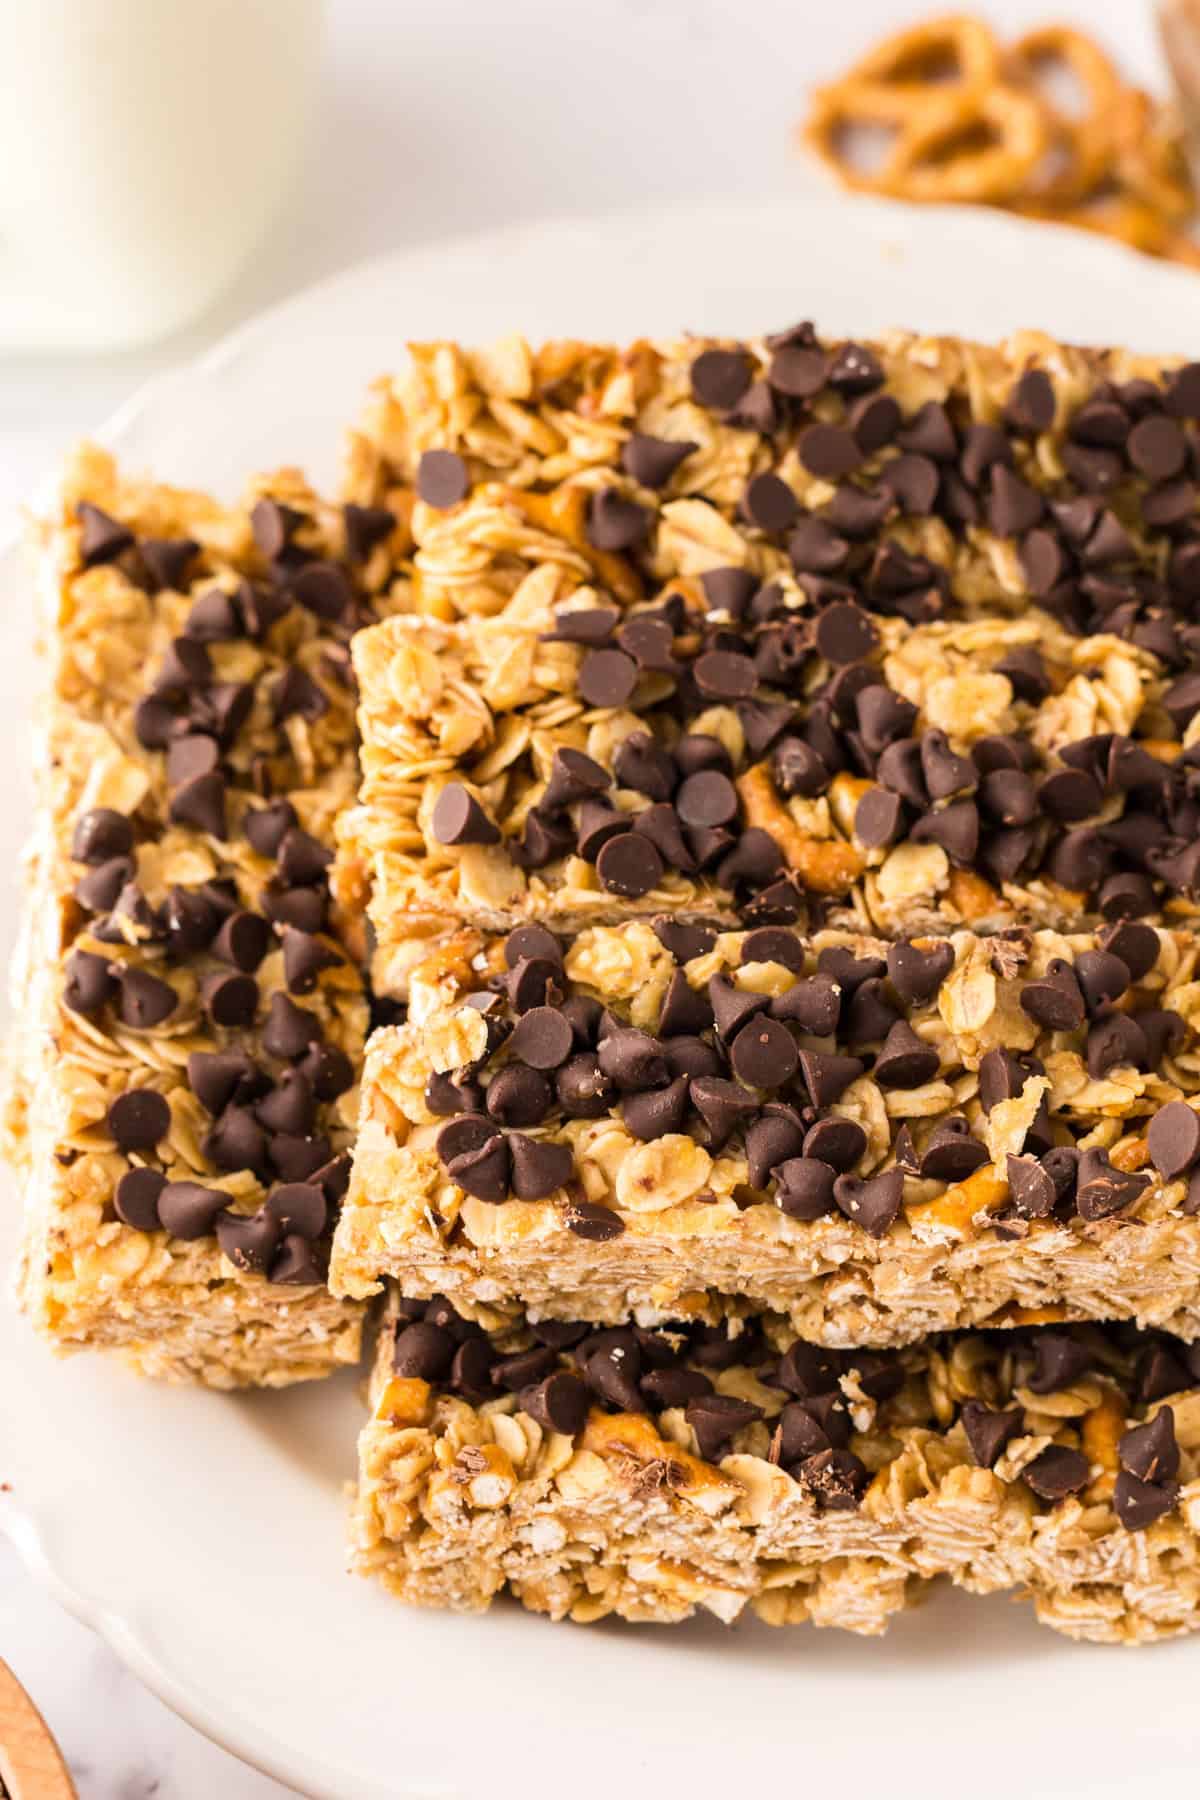 a plate of homemade granola bars with chocolate chips.